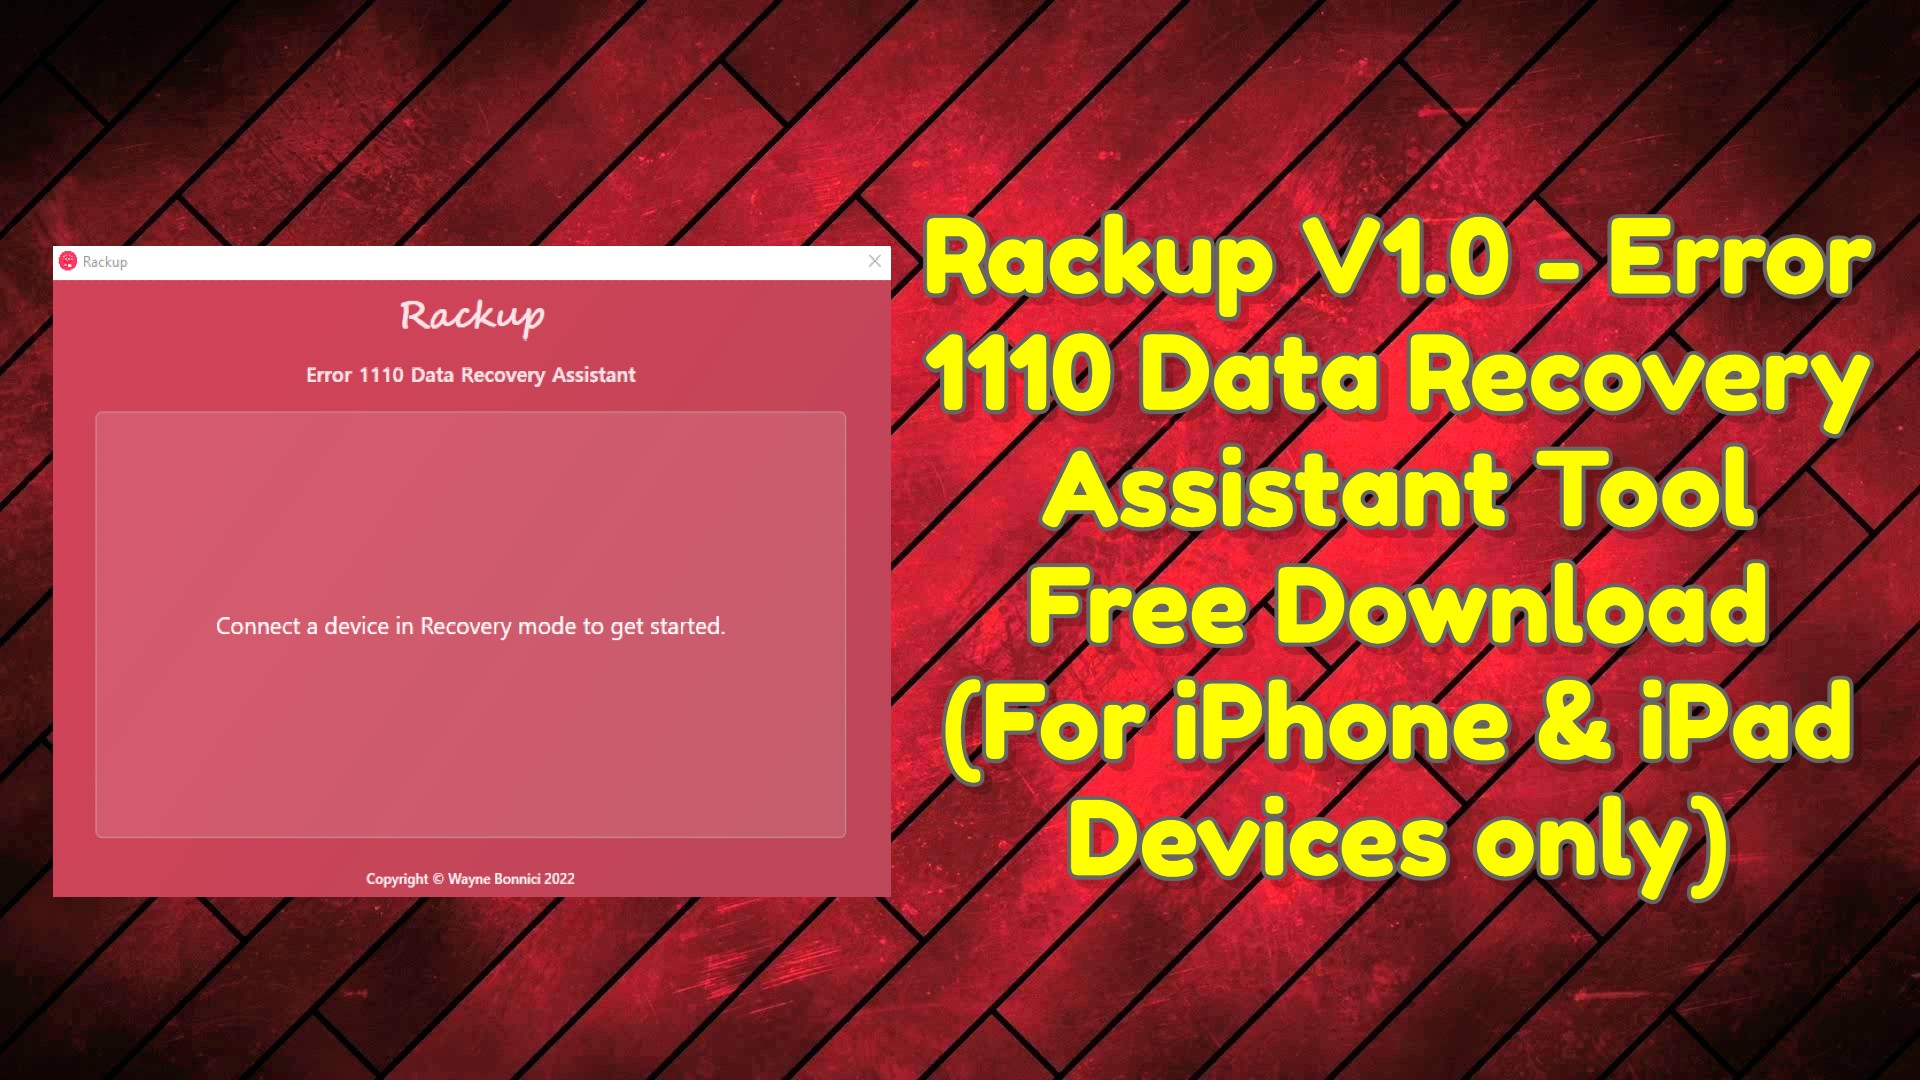 Rackup V1.0 - Error 1110 Data Recovery Assistant Tool Free Download (For iPhone & iPad Devices only)